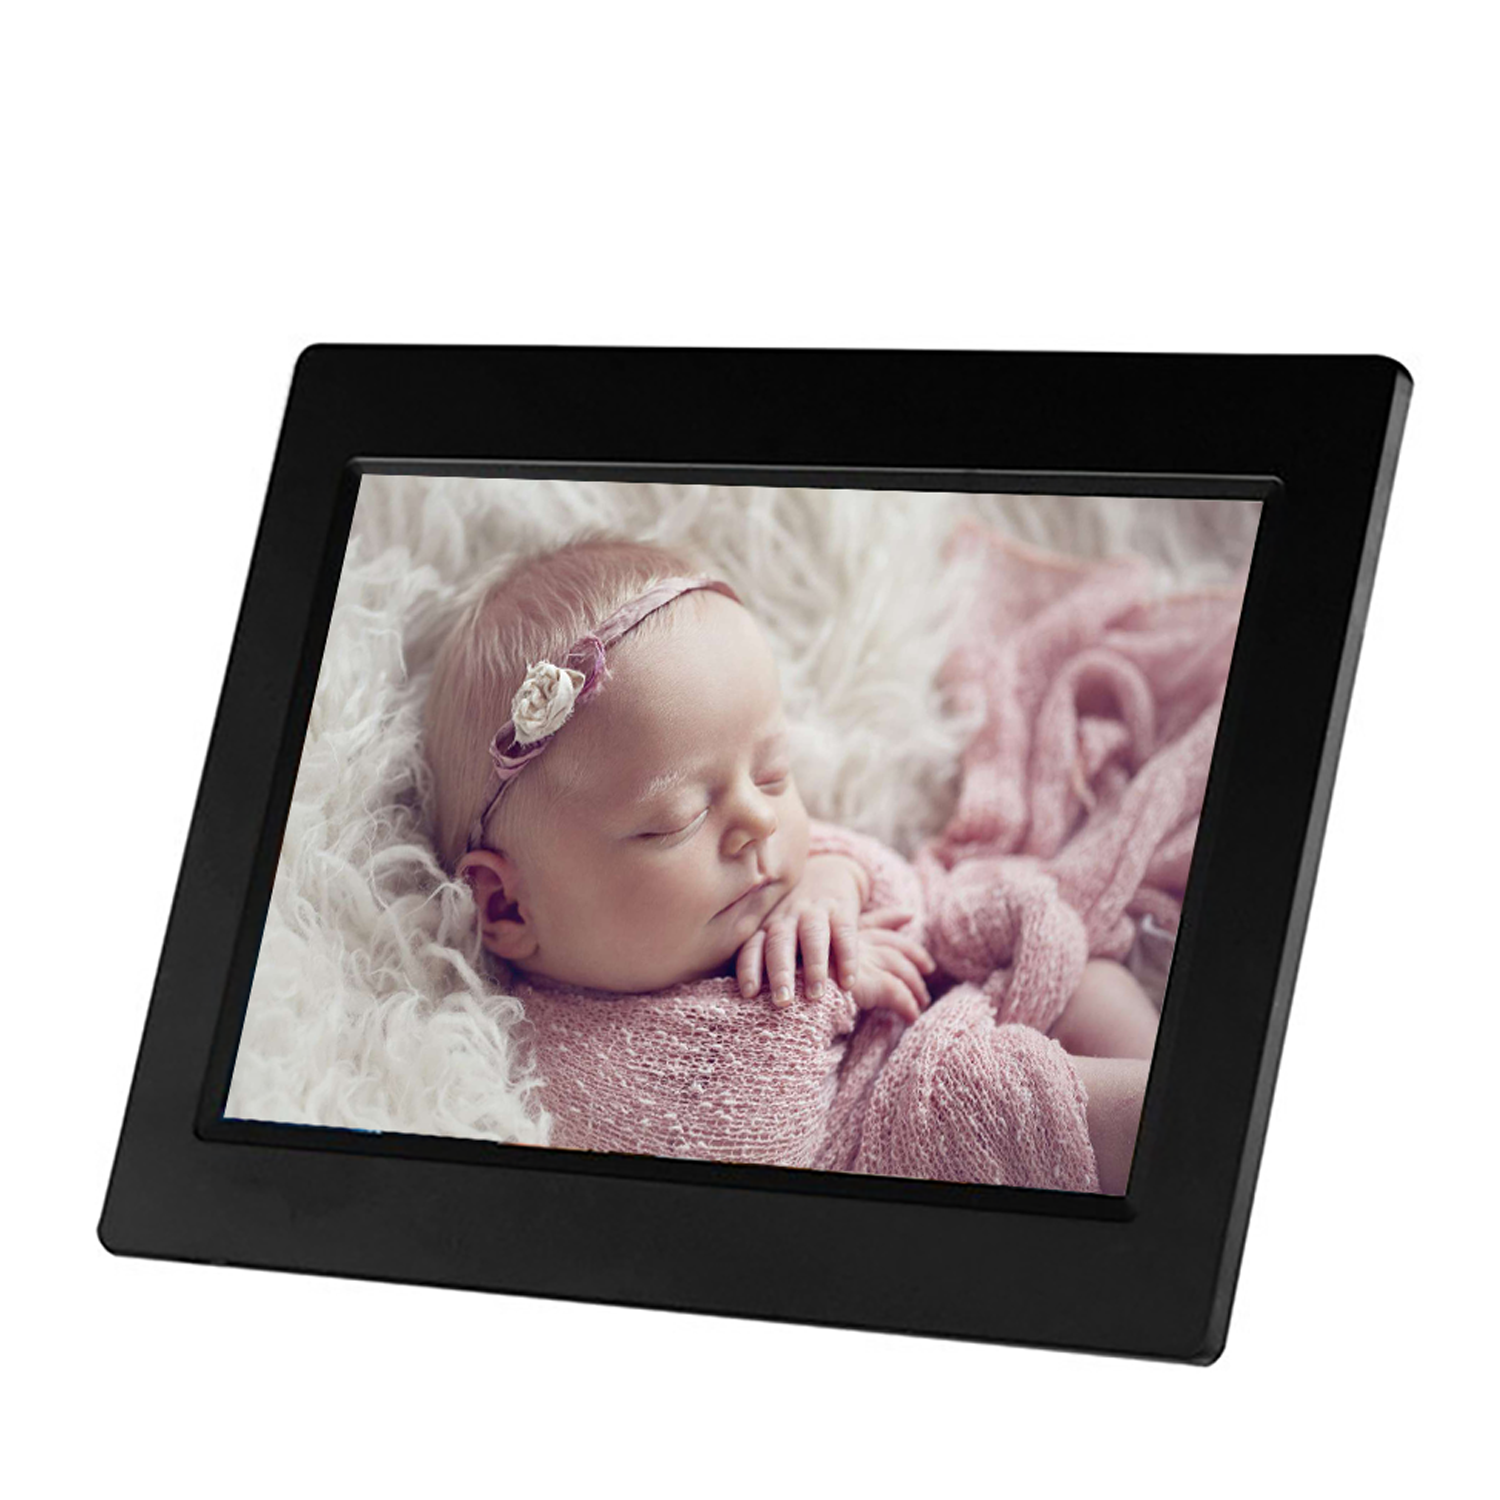 Sylvania 10" LED Touch Screen Digital Picture Frame with Wi-Fi and Cloud